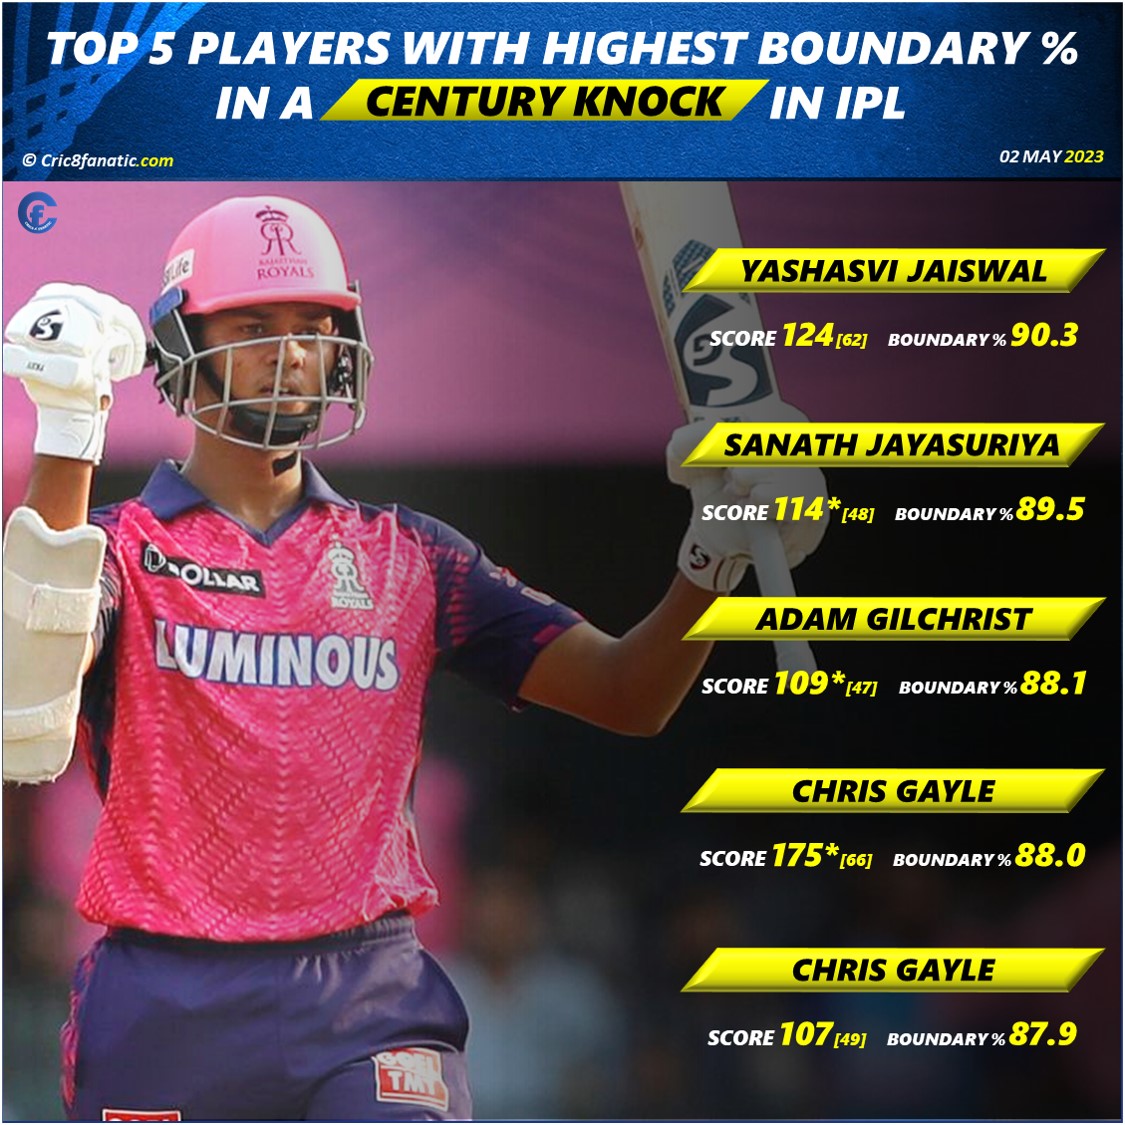 players with highest boundary percentage in a century knock in ipl